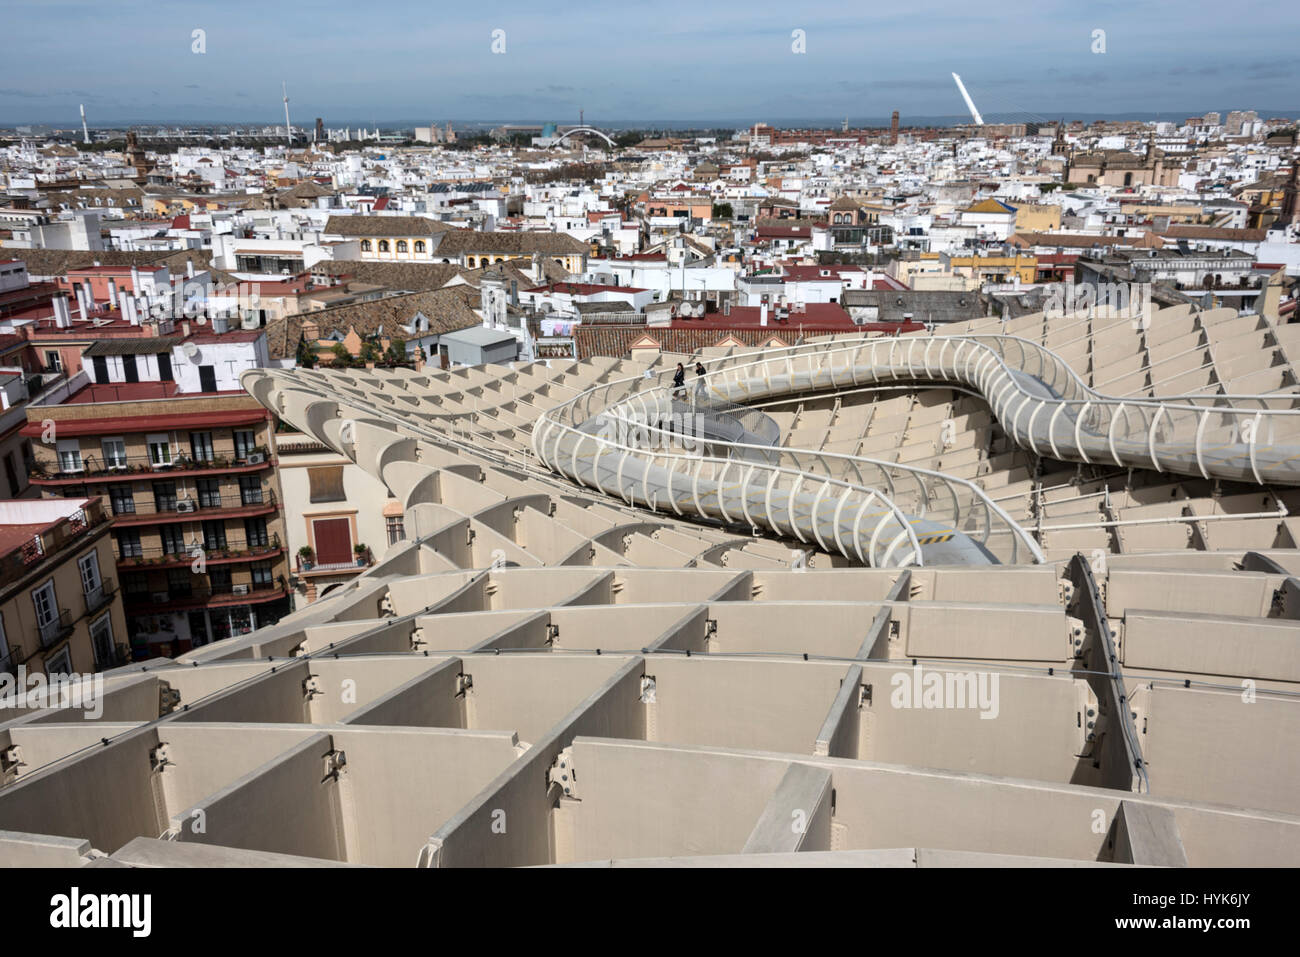 Skyline of Seville from the top ofv the Metropol Parasol, located at La Encarnacion Plaza (square) in the Old Town of Seville in Andulisa Province, Sp Stock Photo